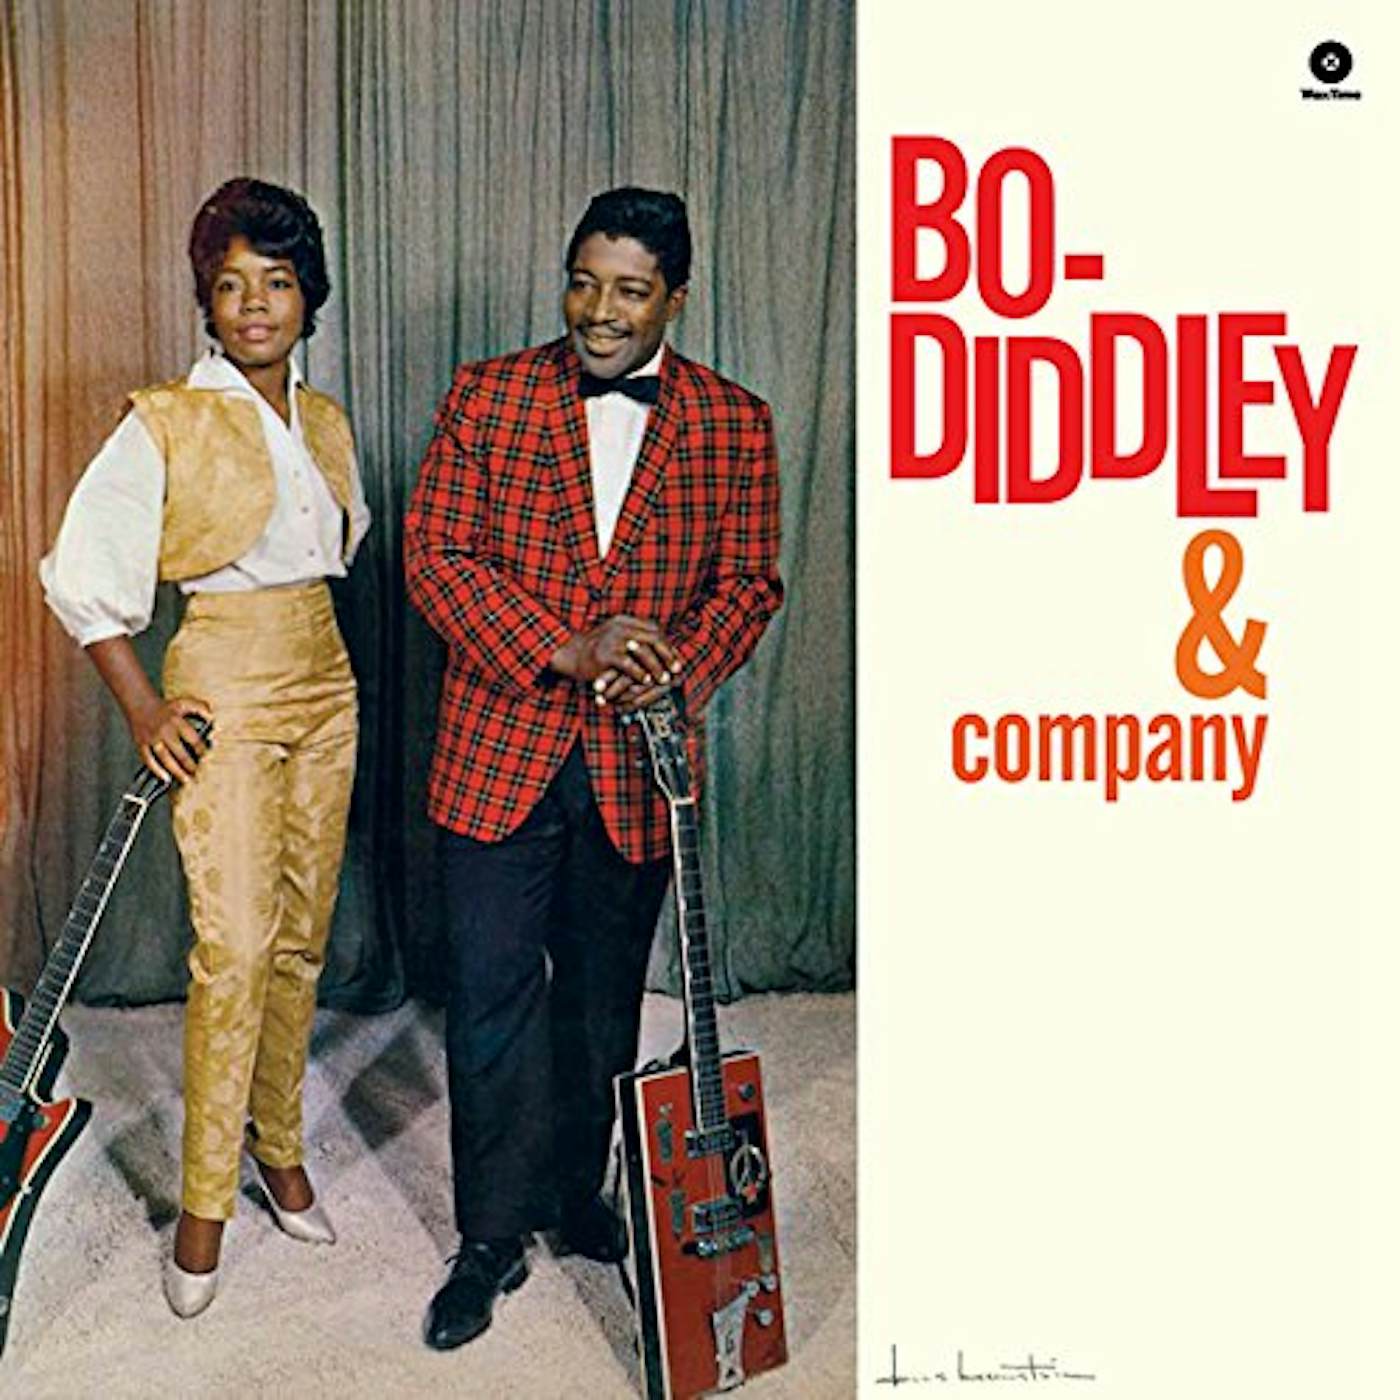 Bo Diddley & COMPANY Vinyl Record - Spain Release